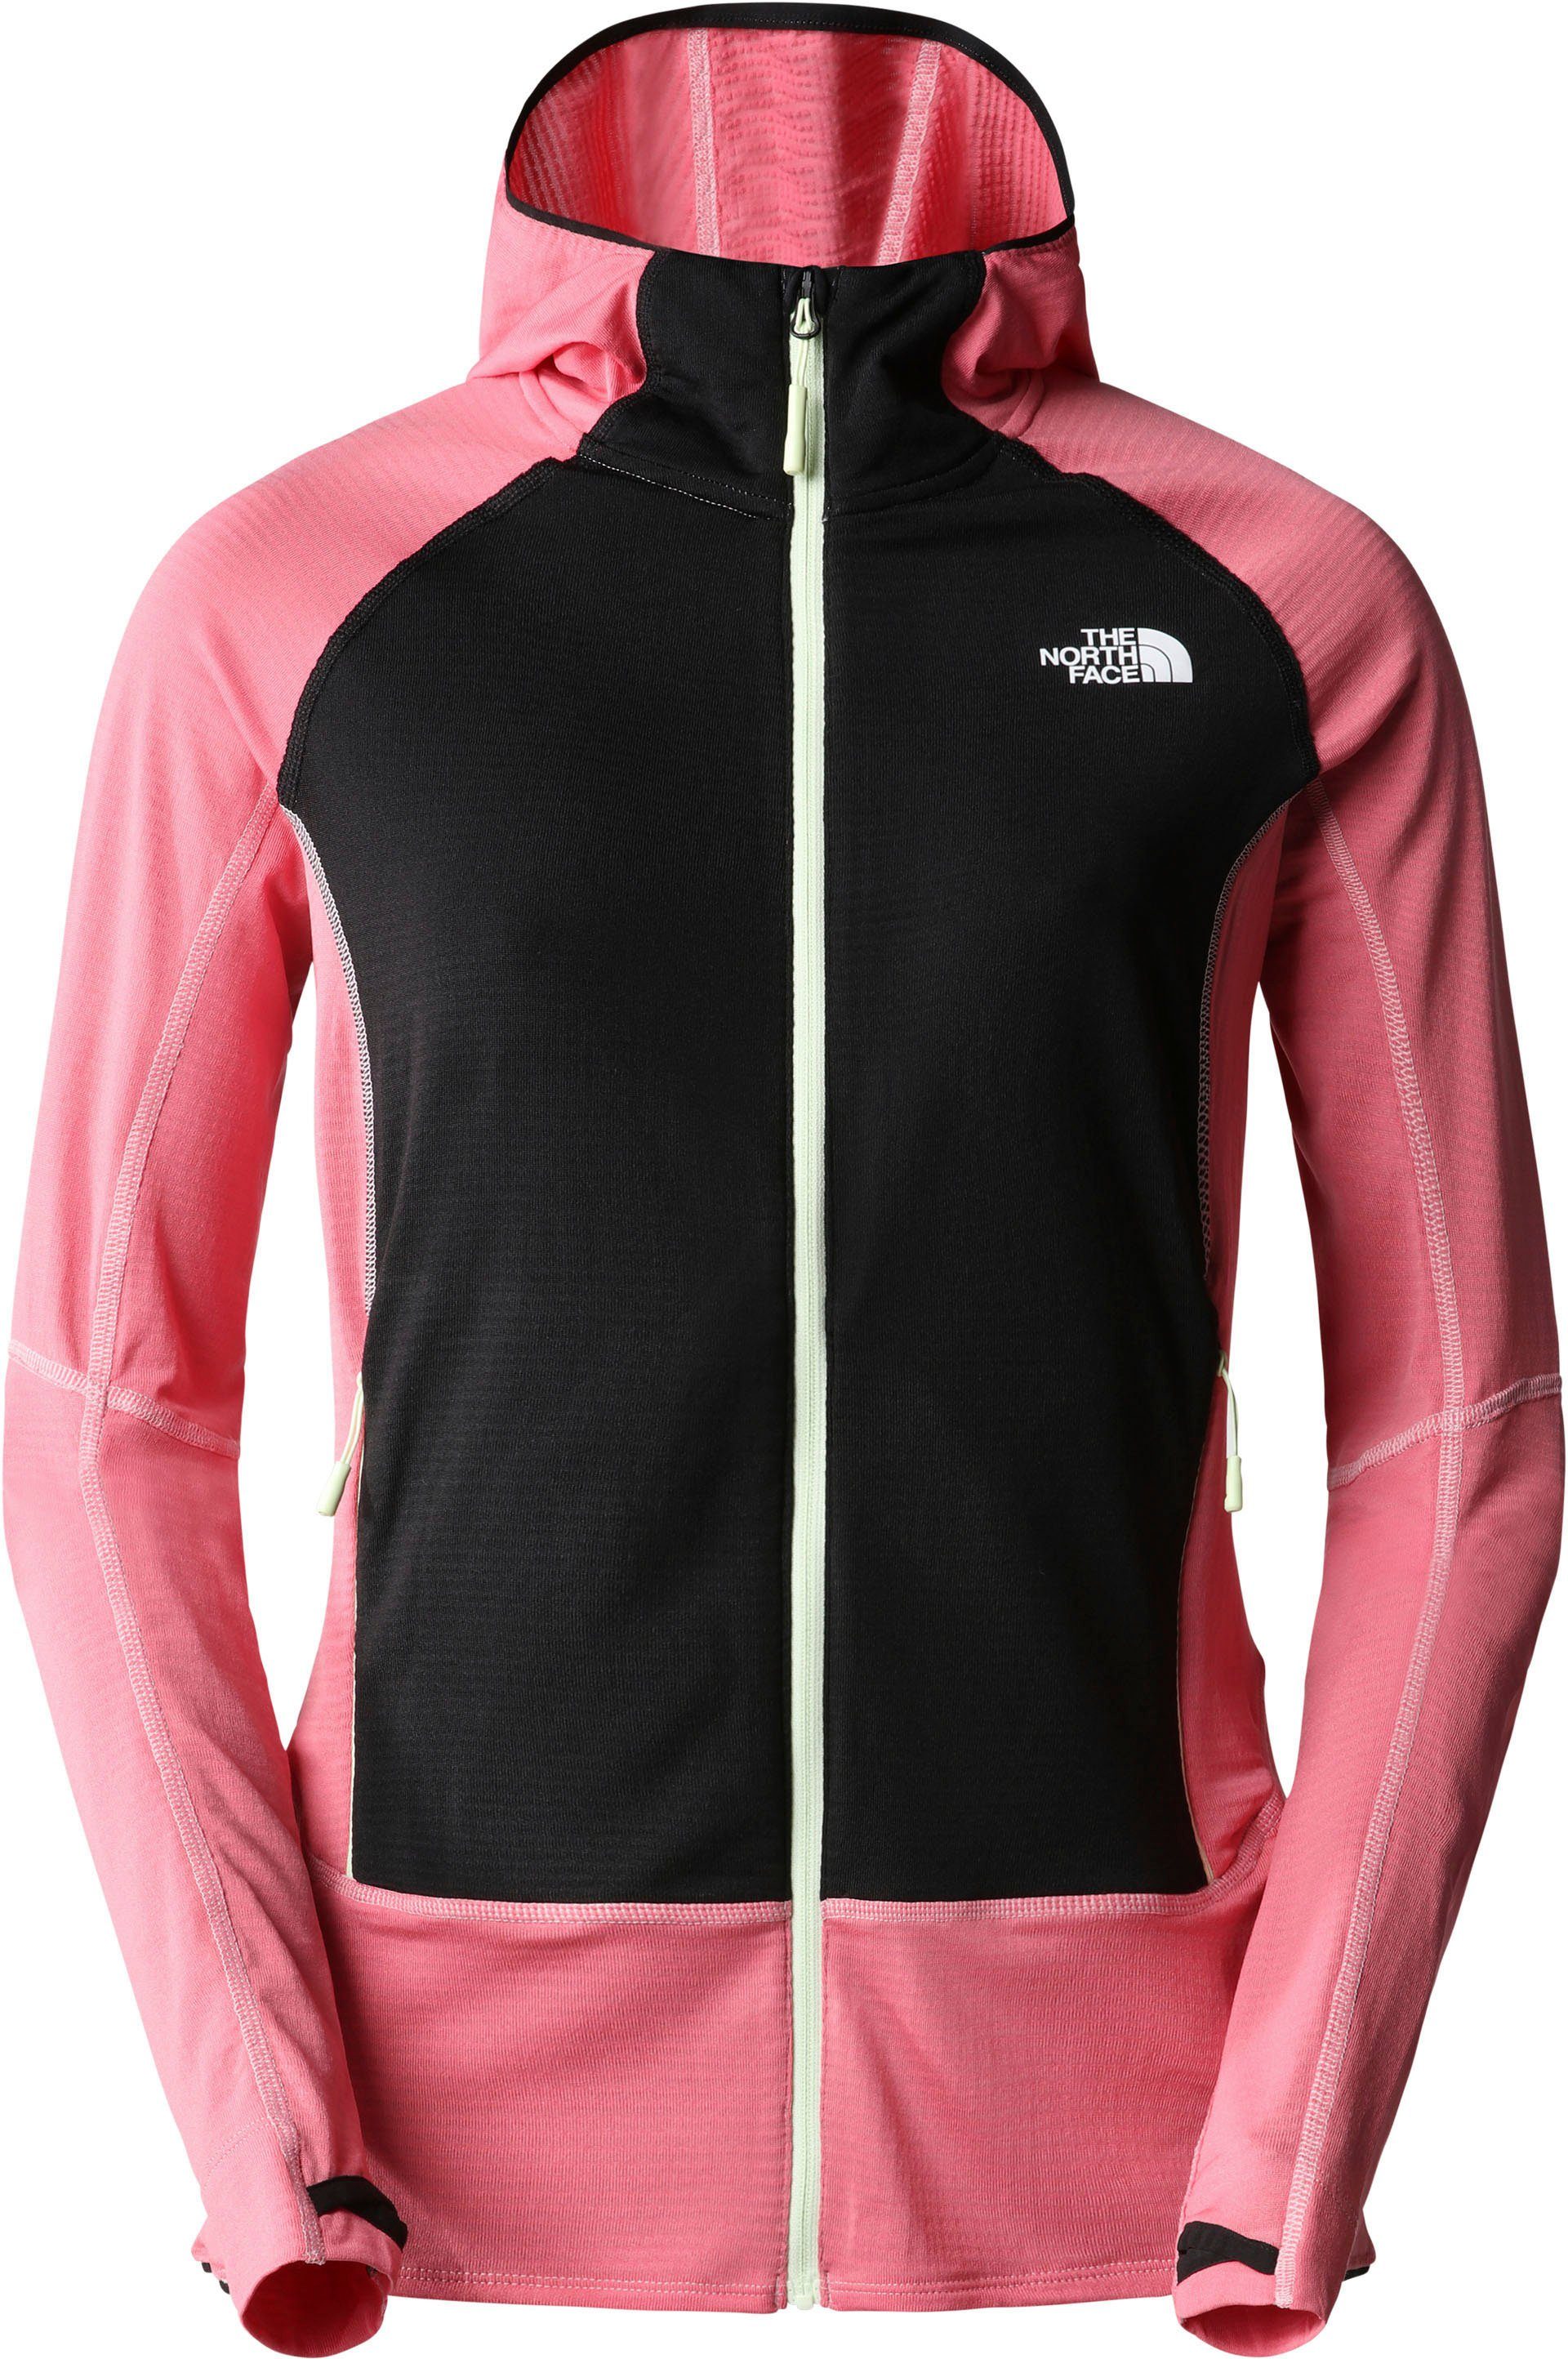 Fleecejacke The North Face W cosmo BOLT HOODIE POLARTEC pink